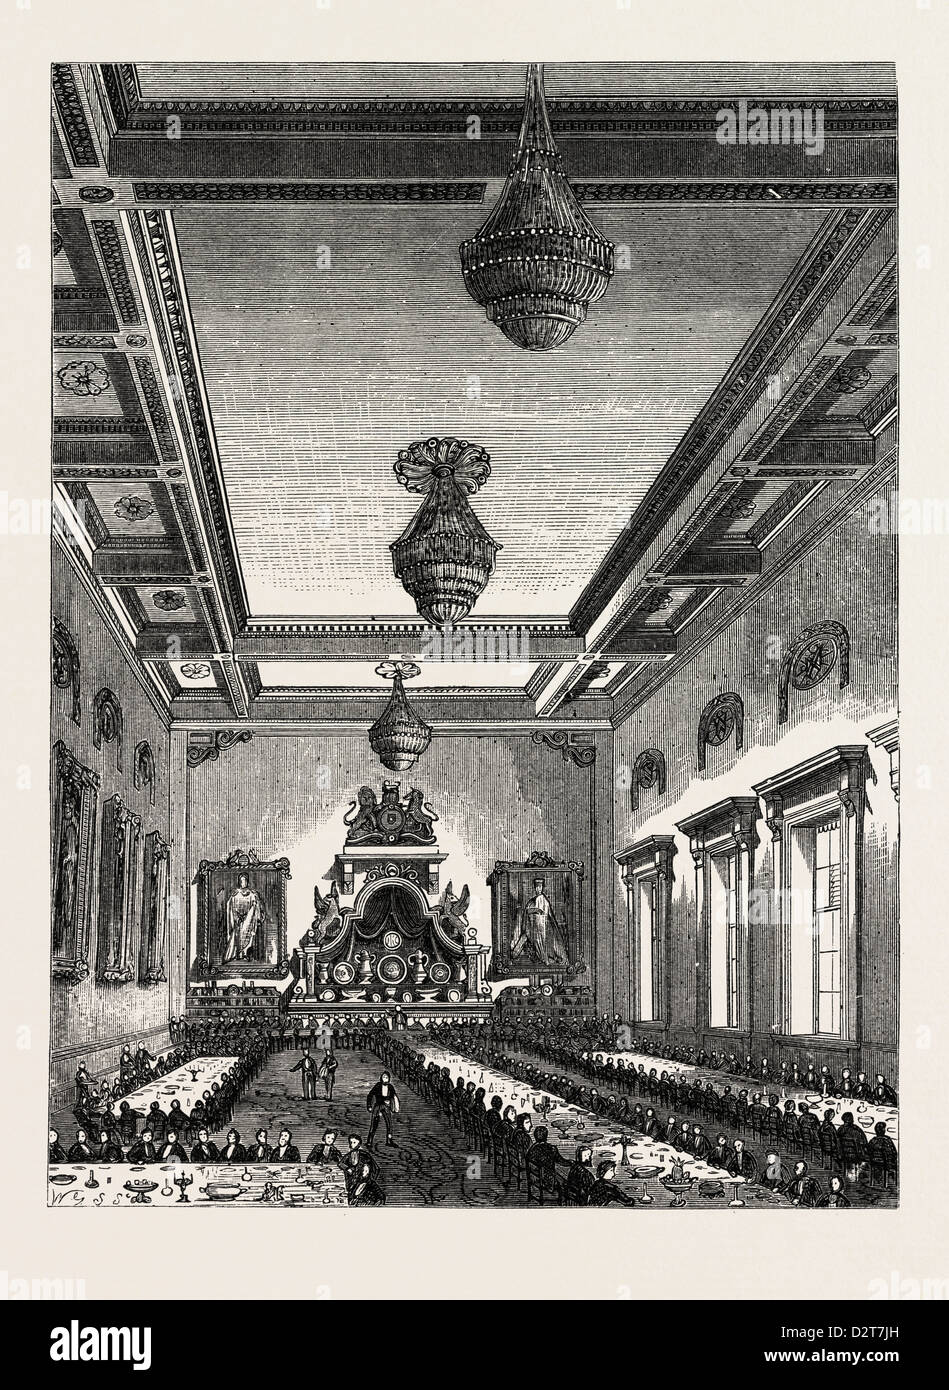 INTERIOR OF GROCERS' HALL 1876 LONDON Stock Photo